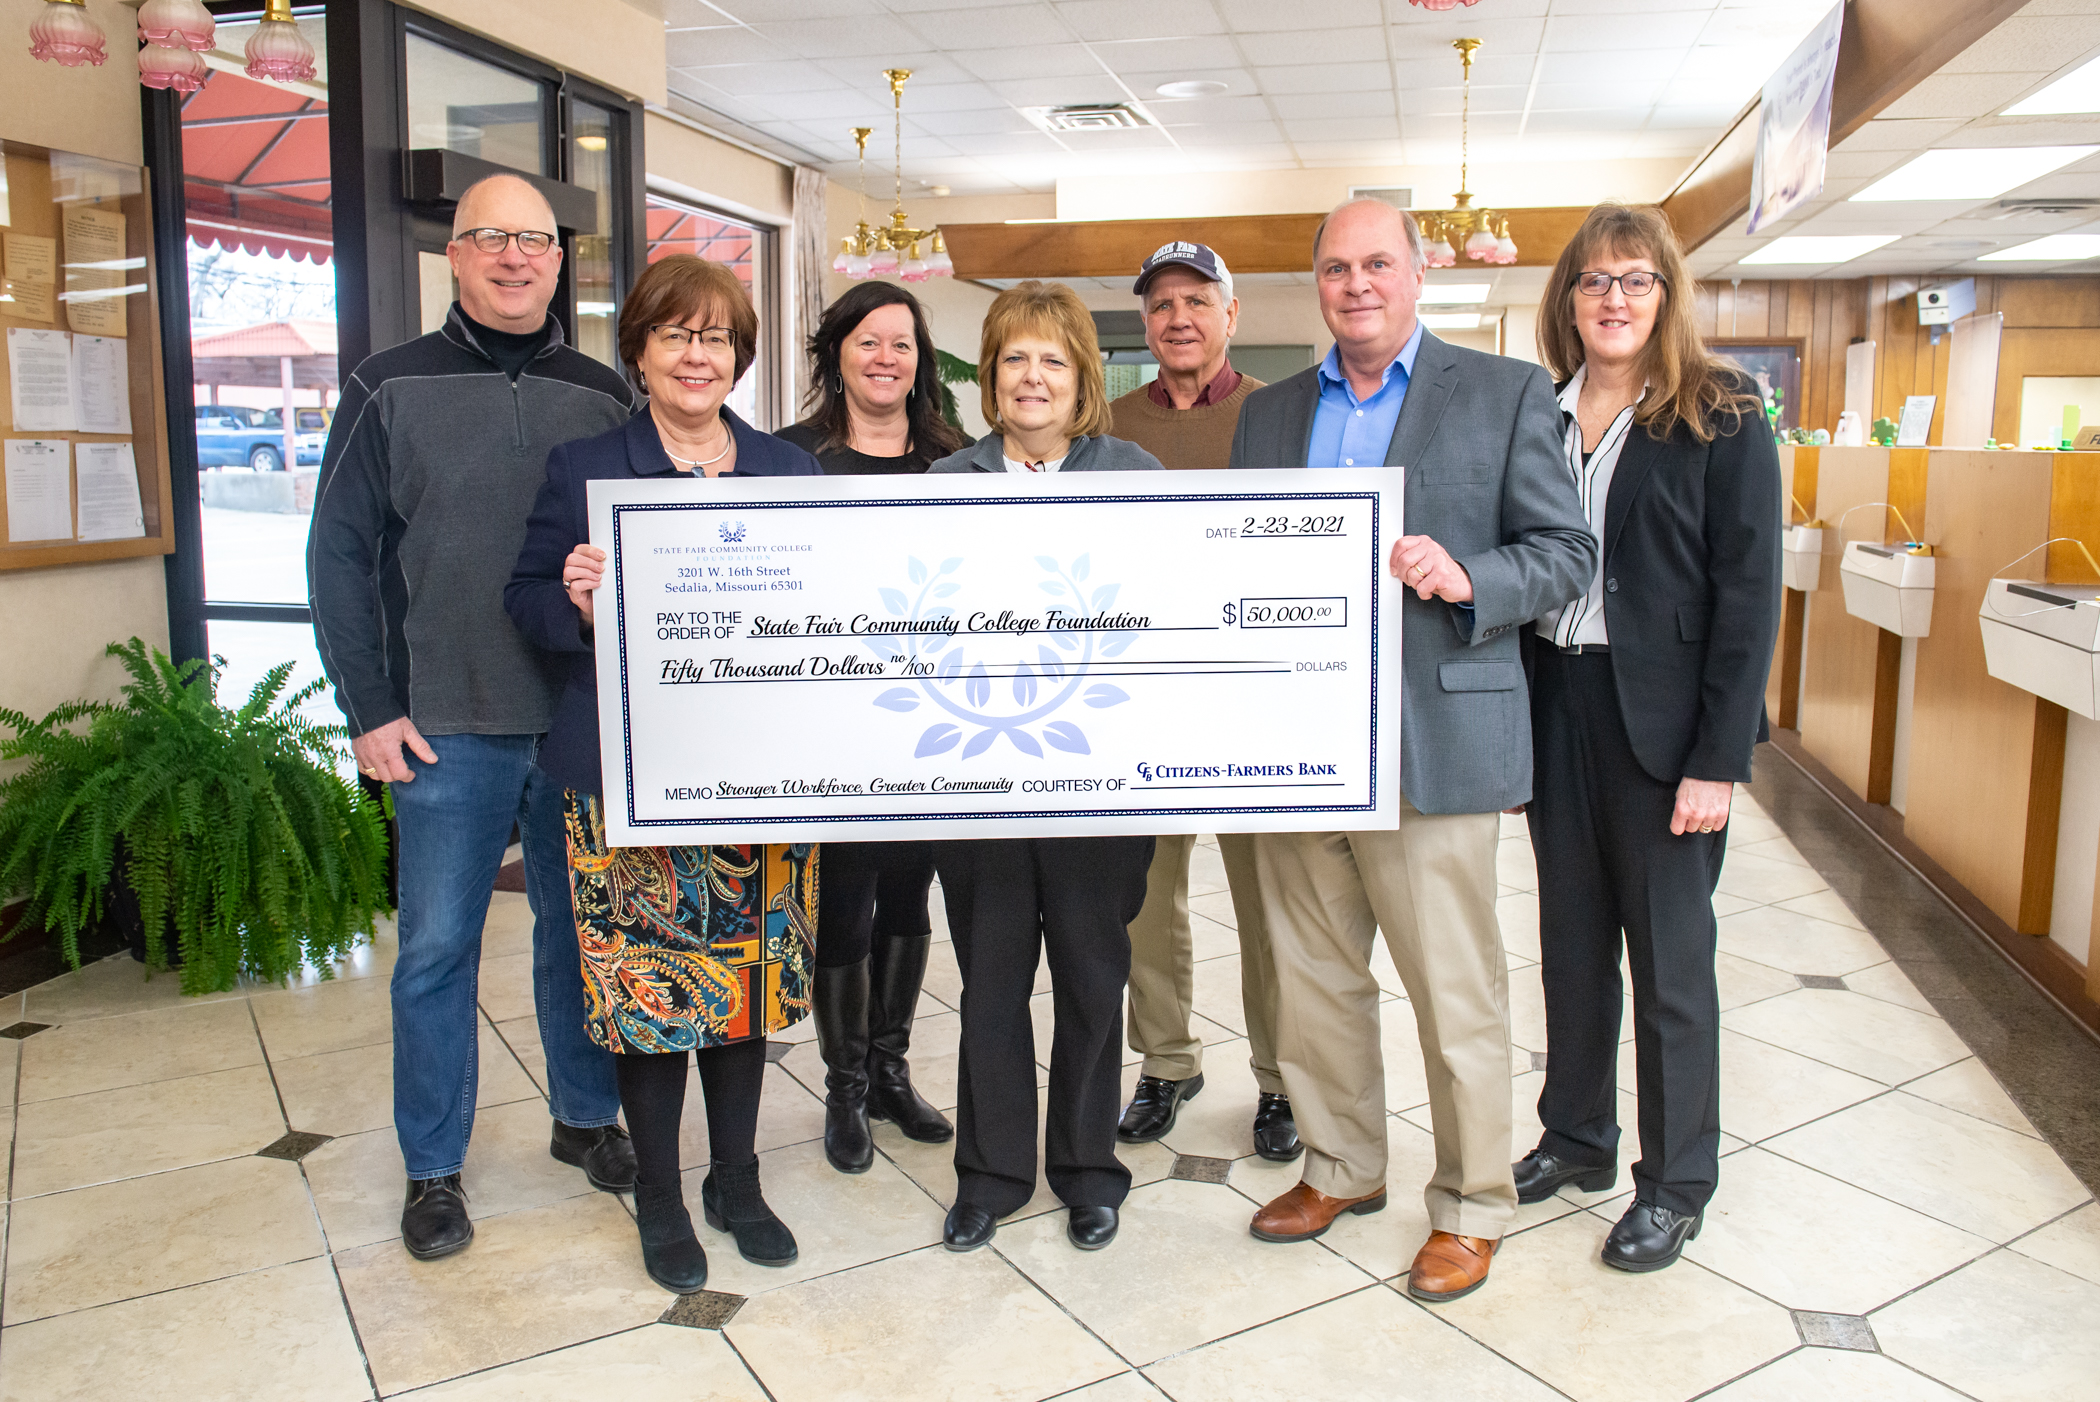 Read more about Citizens-Farmers Bank of Cole Camp donates $50,000 to SFCC’s capital campaign